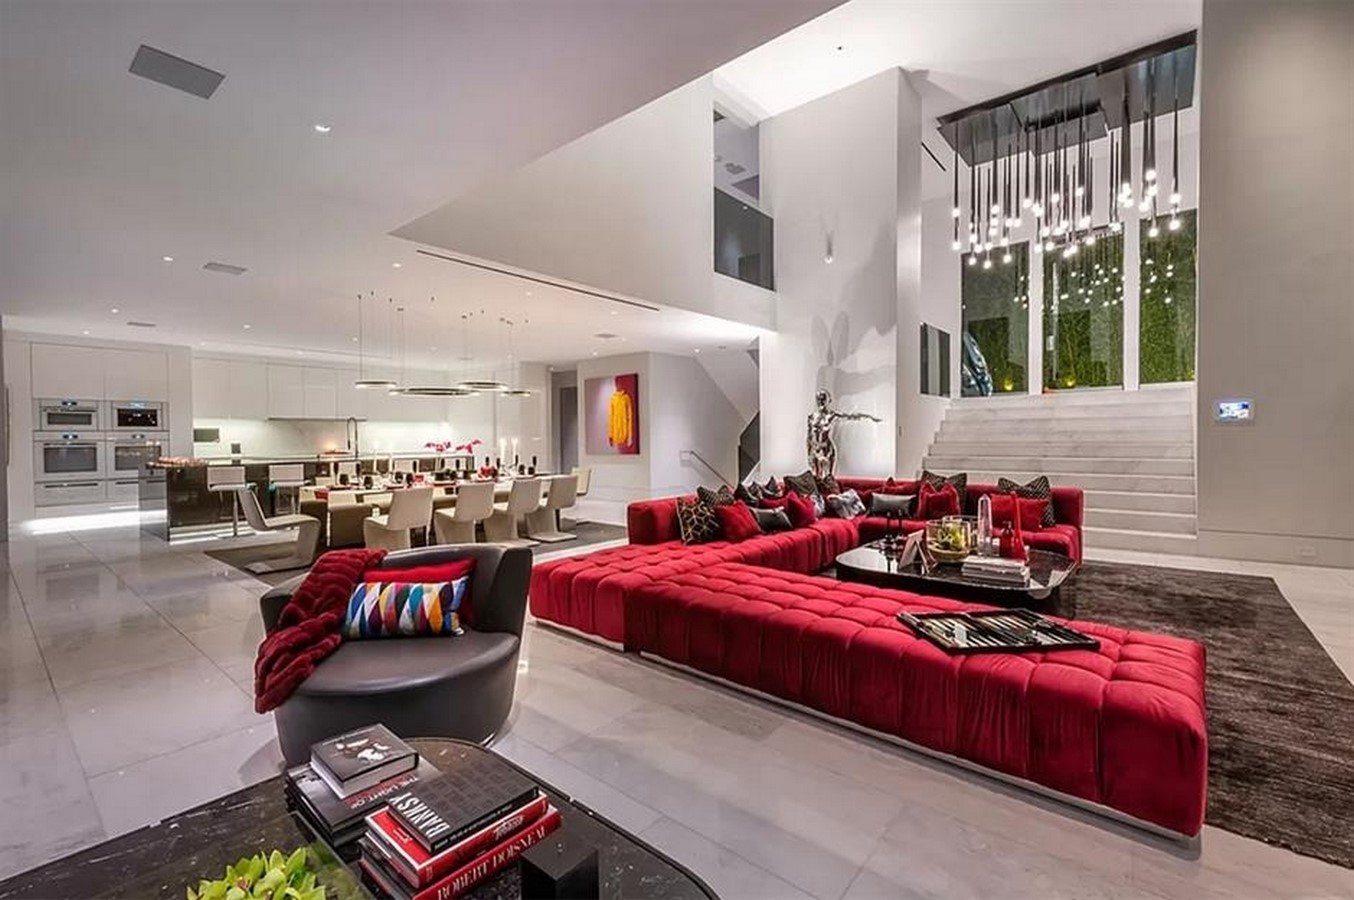 An inside look at all the houses owned by Justin Bieber - Sheet24